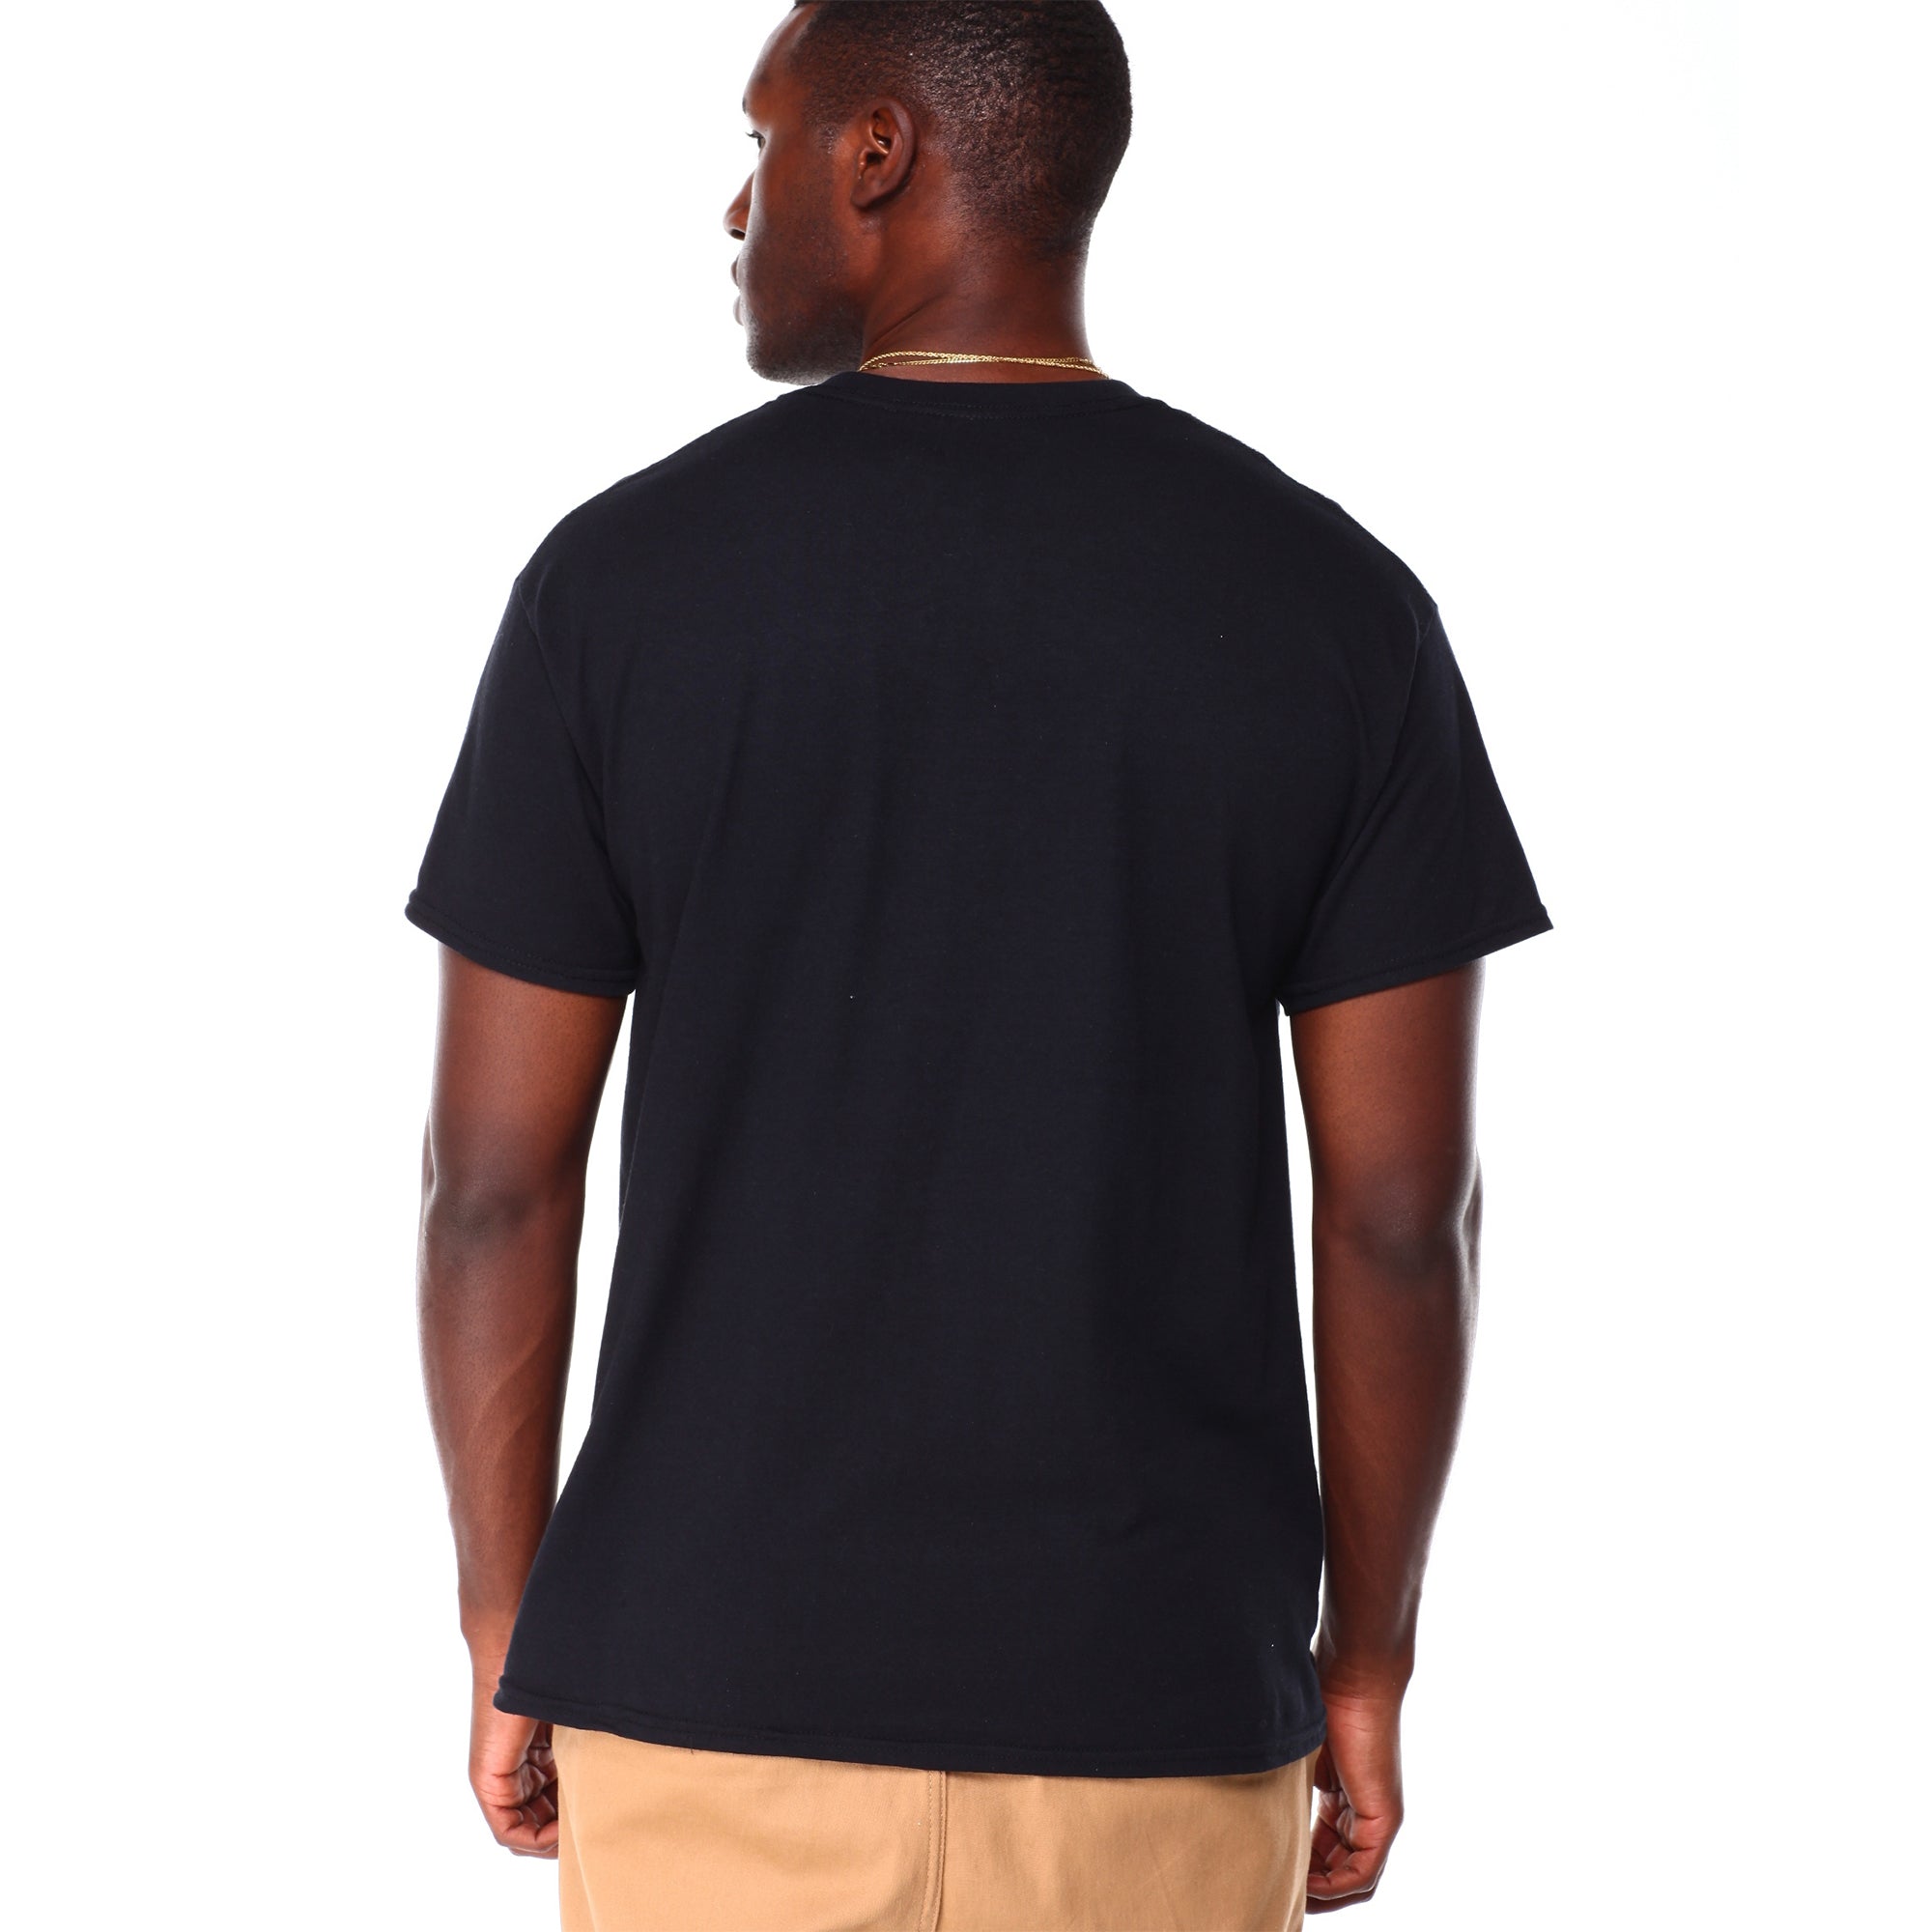 3Forty Inc Men Hennything is Possible T-Shirt (Black)-Nexus Clothing